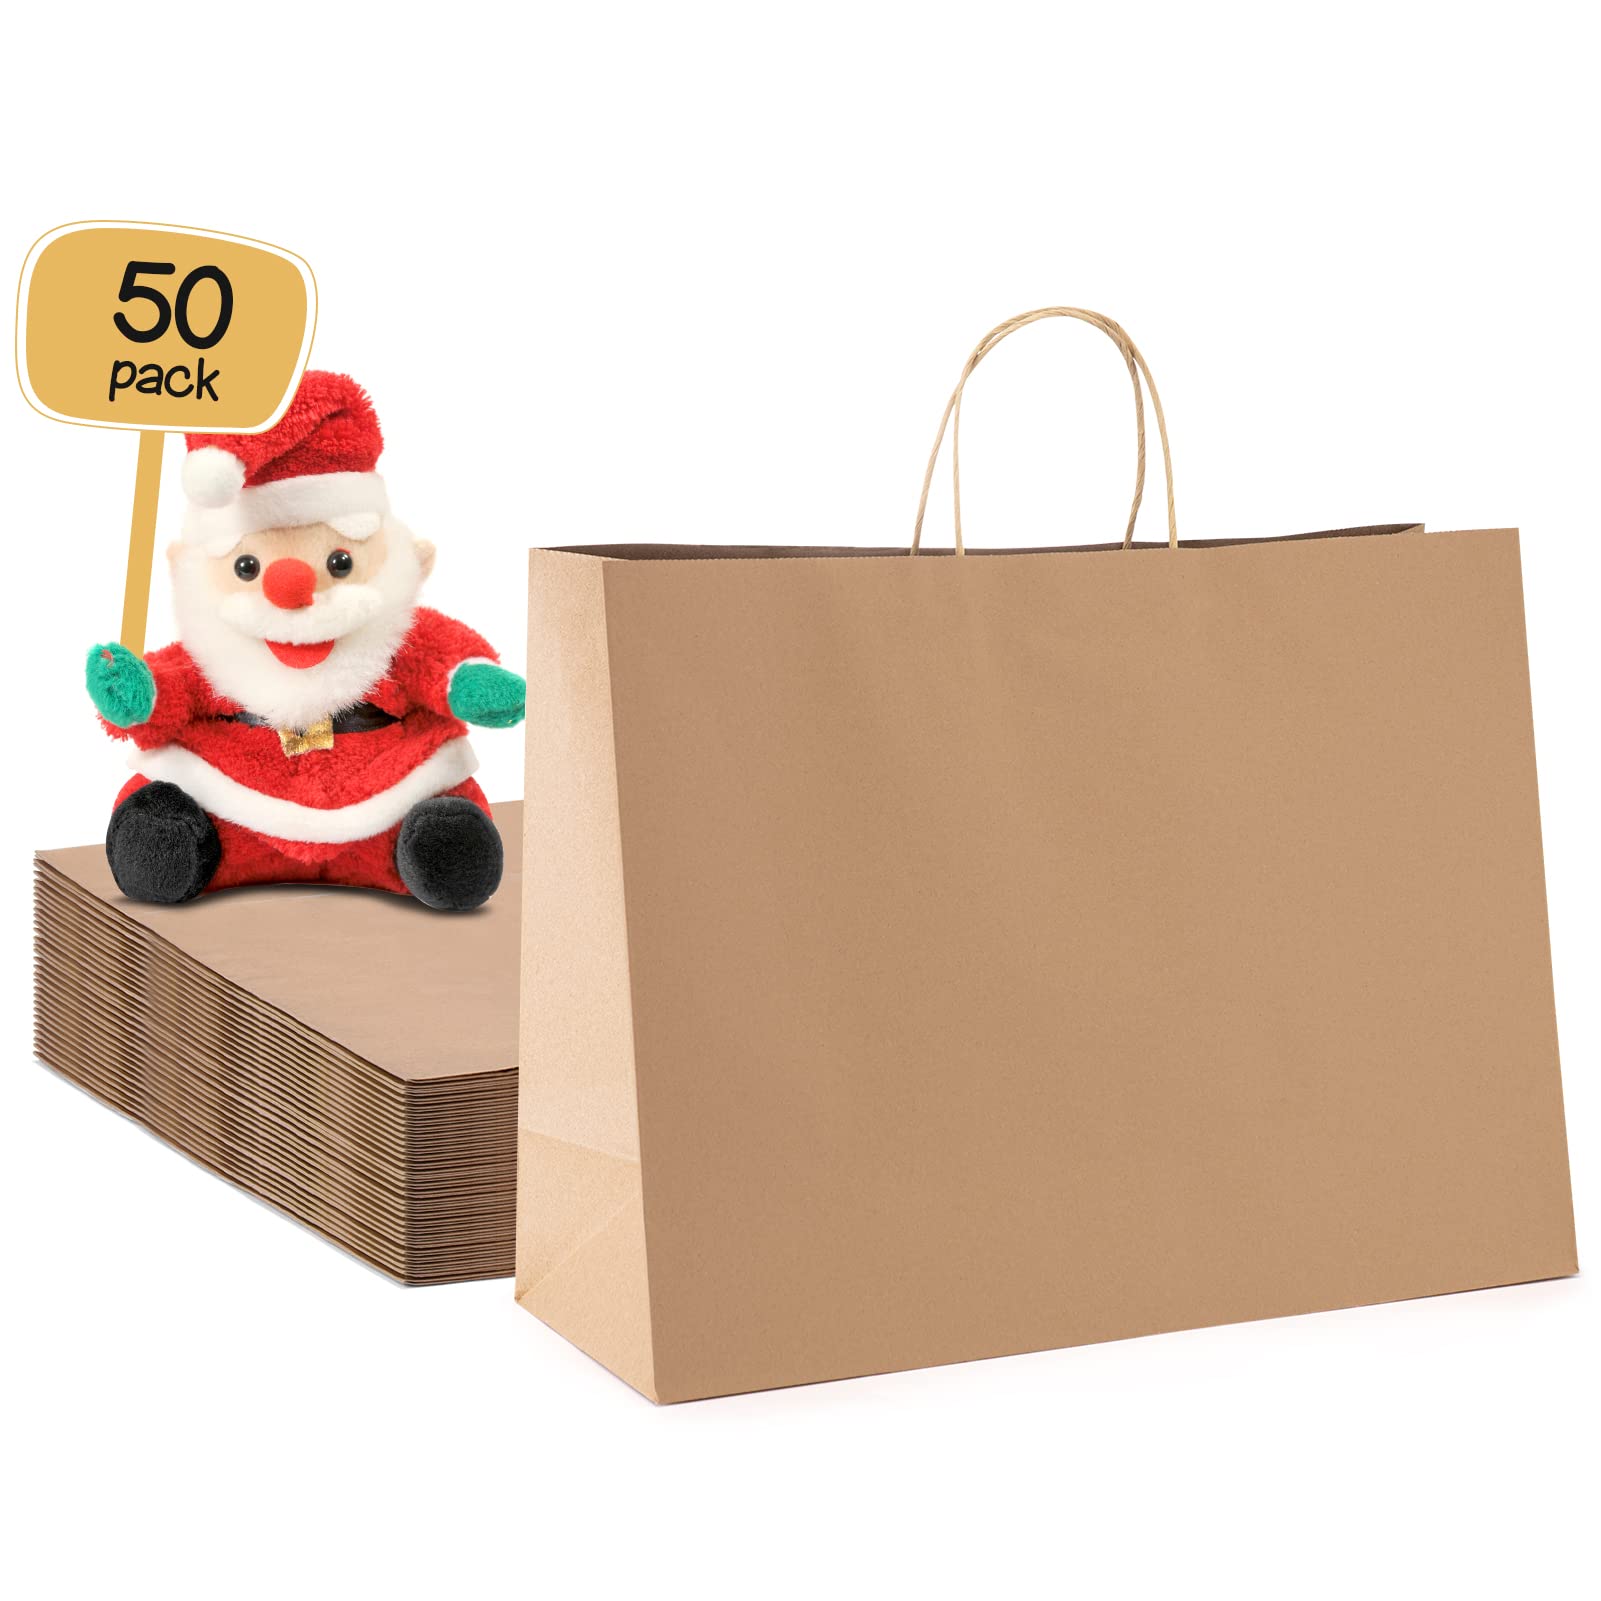 Metronic Paper Gift Bags 16X6X12 50Pcs, Brown Kraft Paper Bags With Handles, Christmas Gift Wrap Bags For Small Business, Large